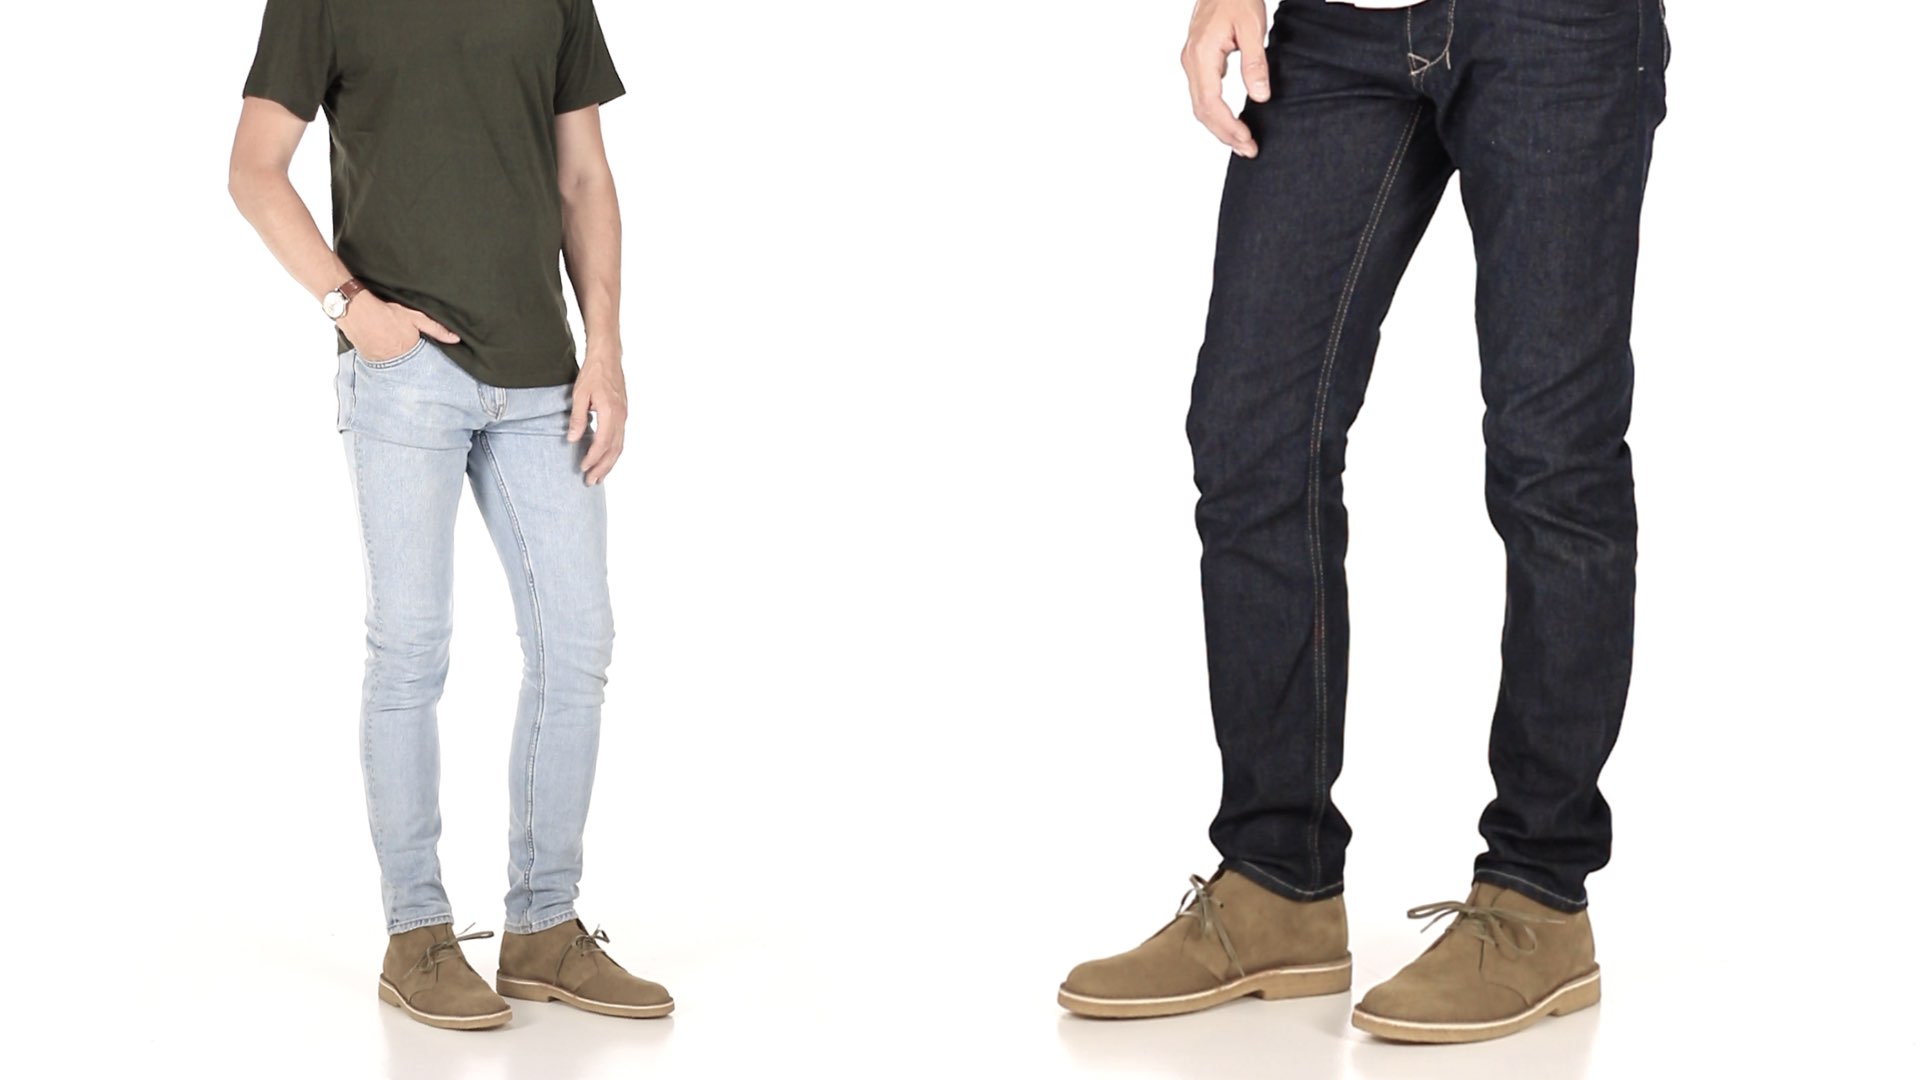 shoes to wear with tapered jeans